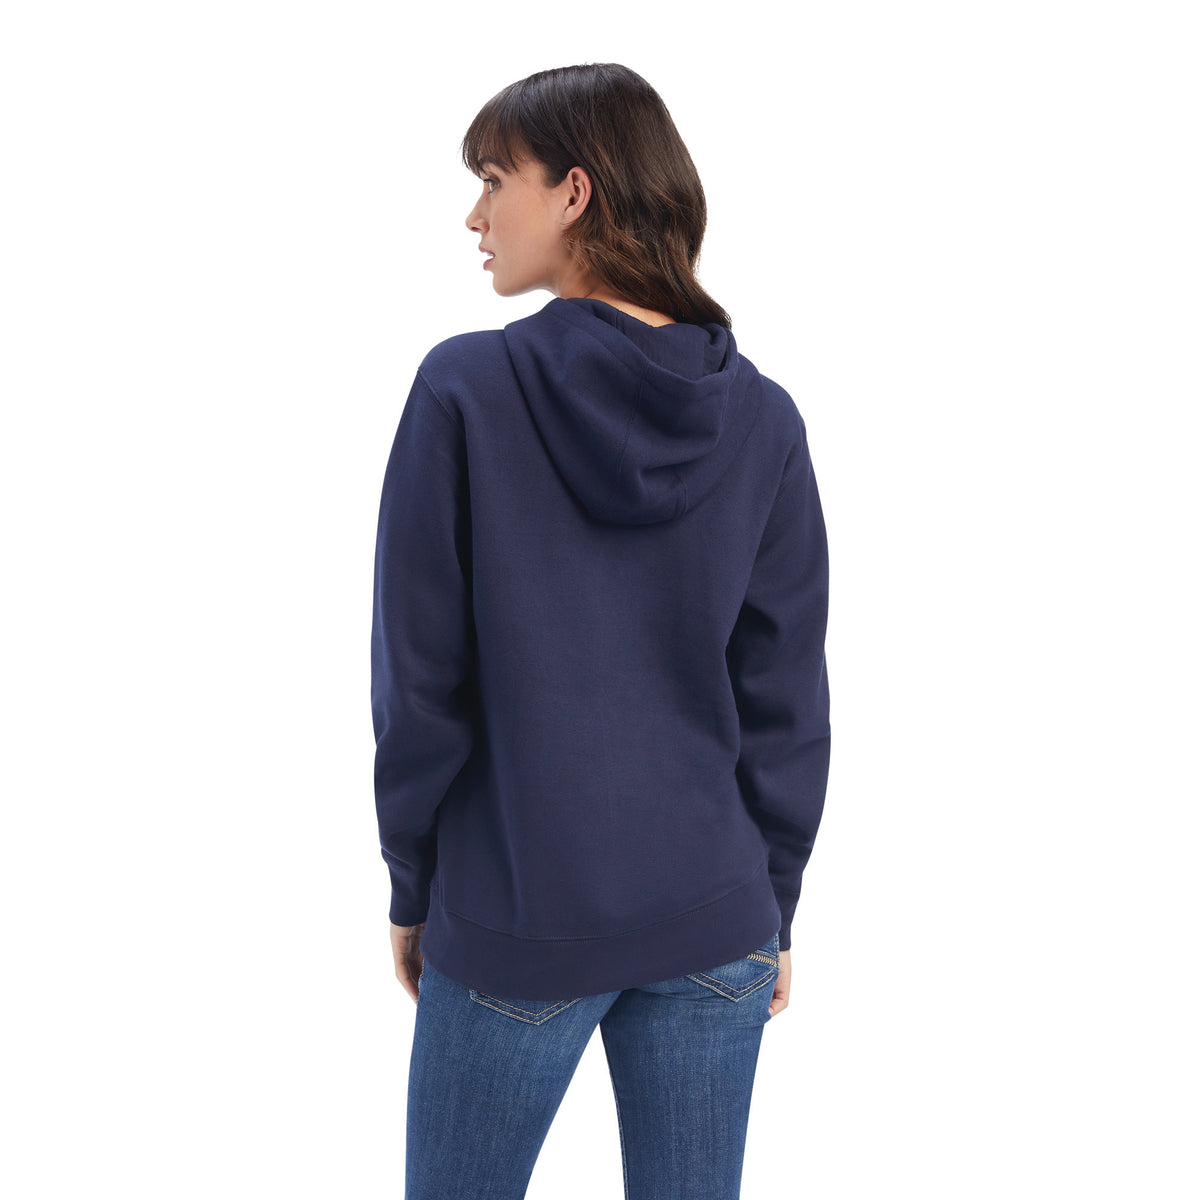 Ariat Womens Real Shield Logo Hoodie - Navy Eclipse